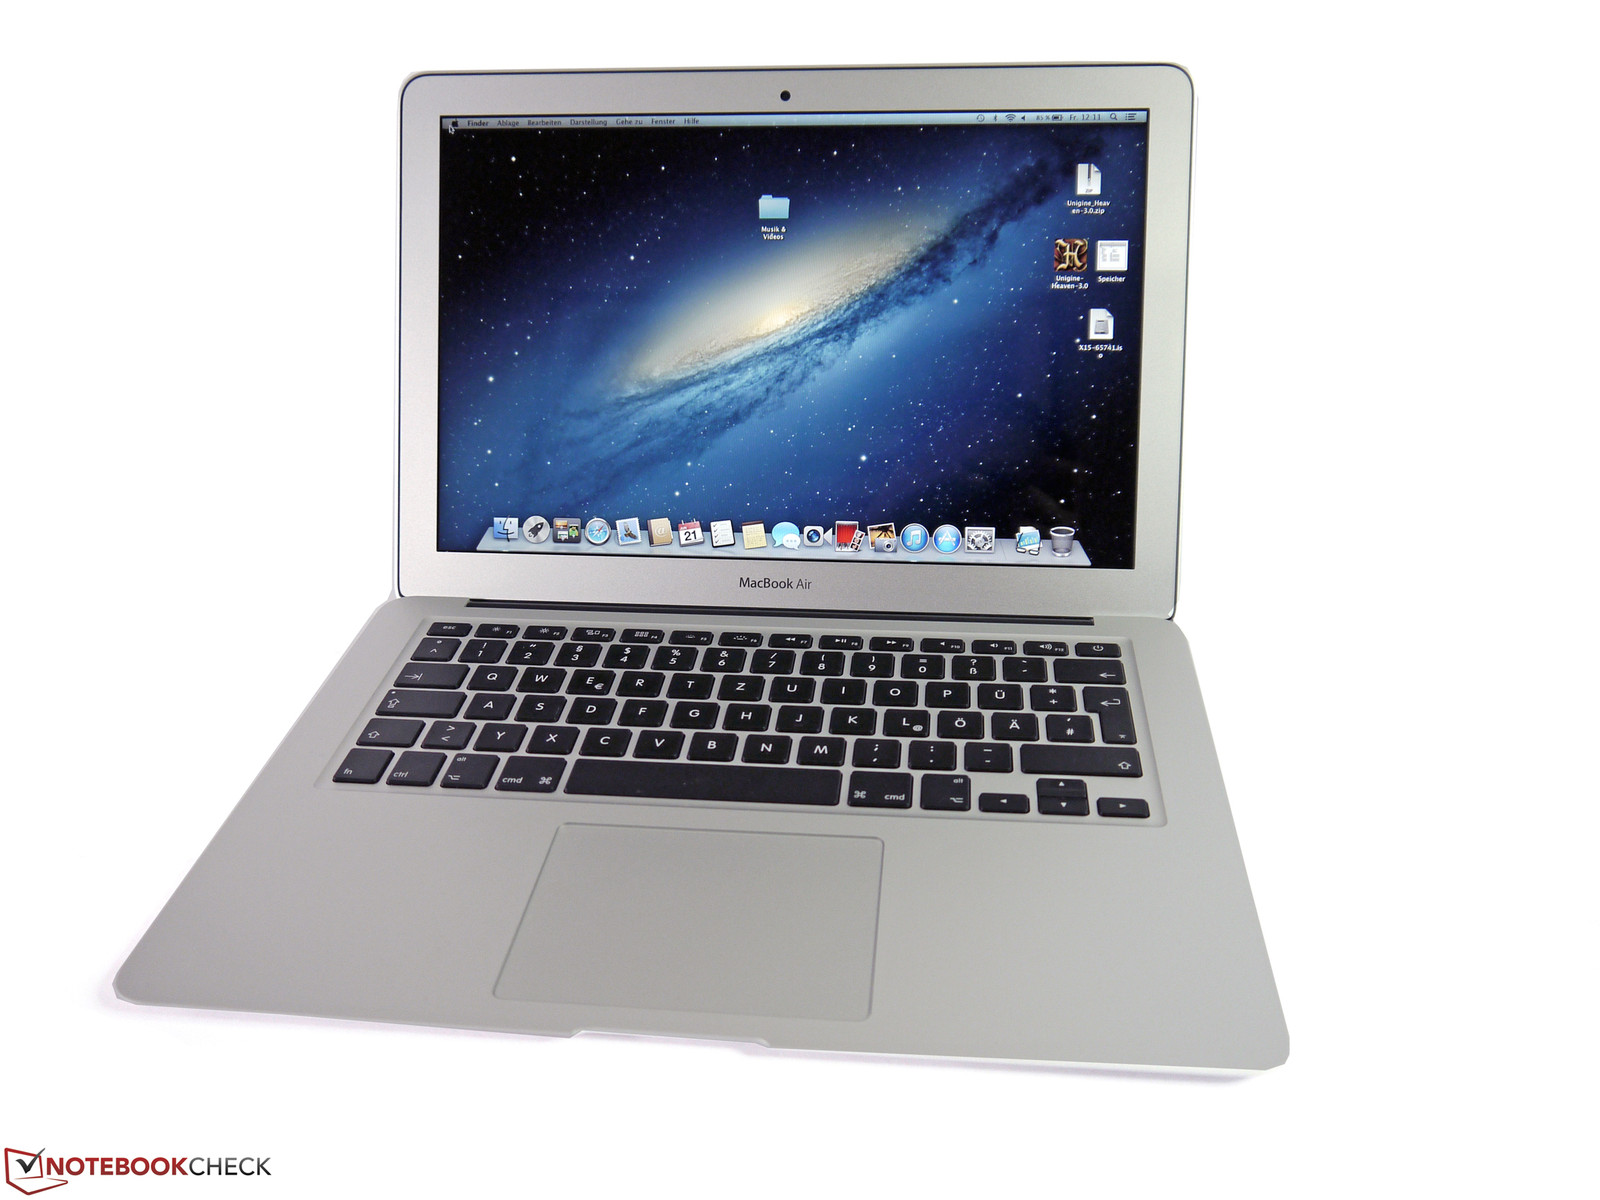 whats the best os for macbook air mid 2012